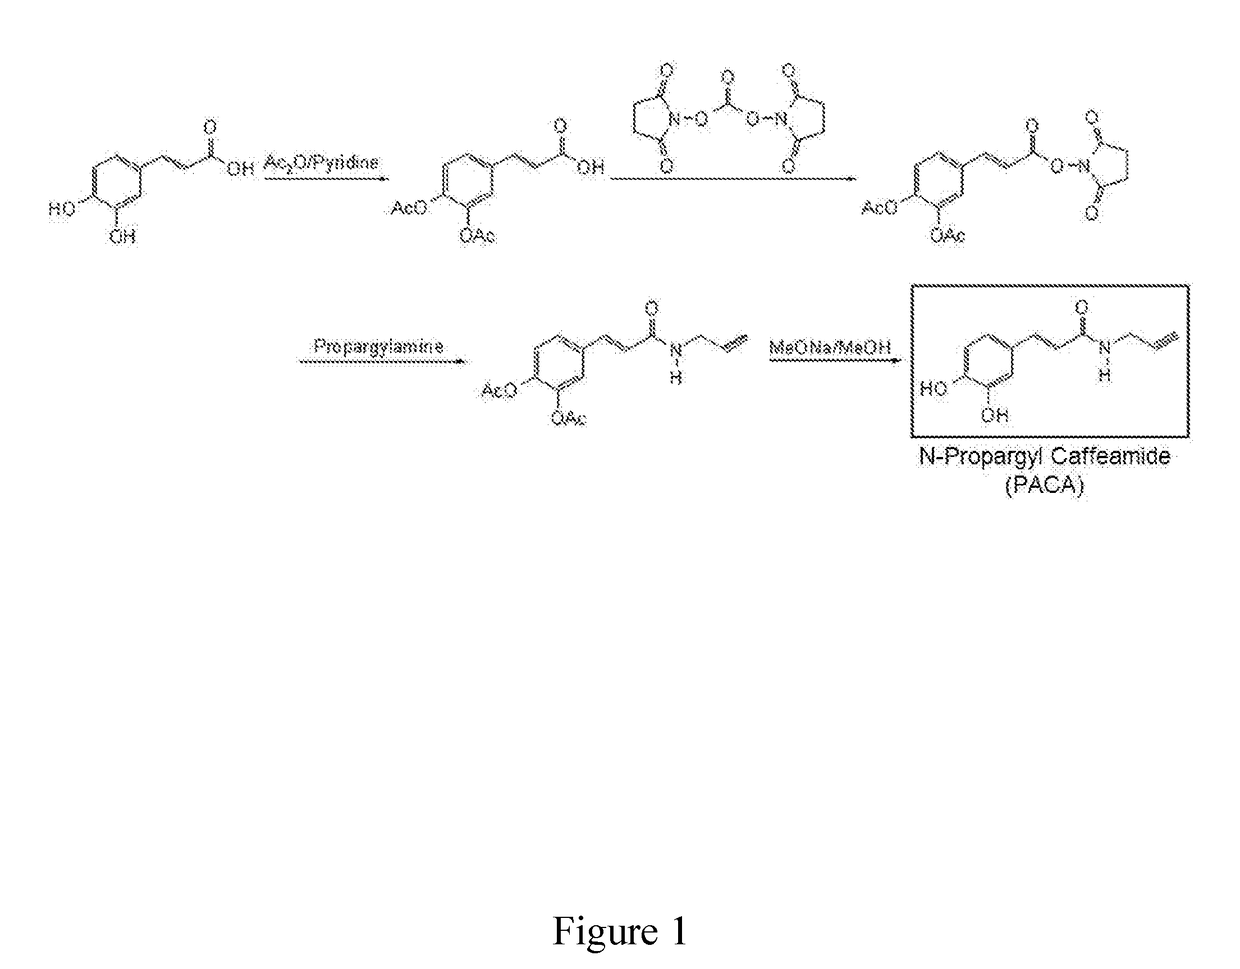 A Novel Neuroprotective and Neurorestorative N-Propargyl Caffeamide (PACA) and Use as A Treatment for Neurodegenerative Diseases